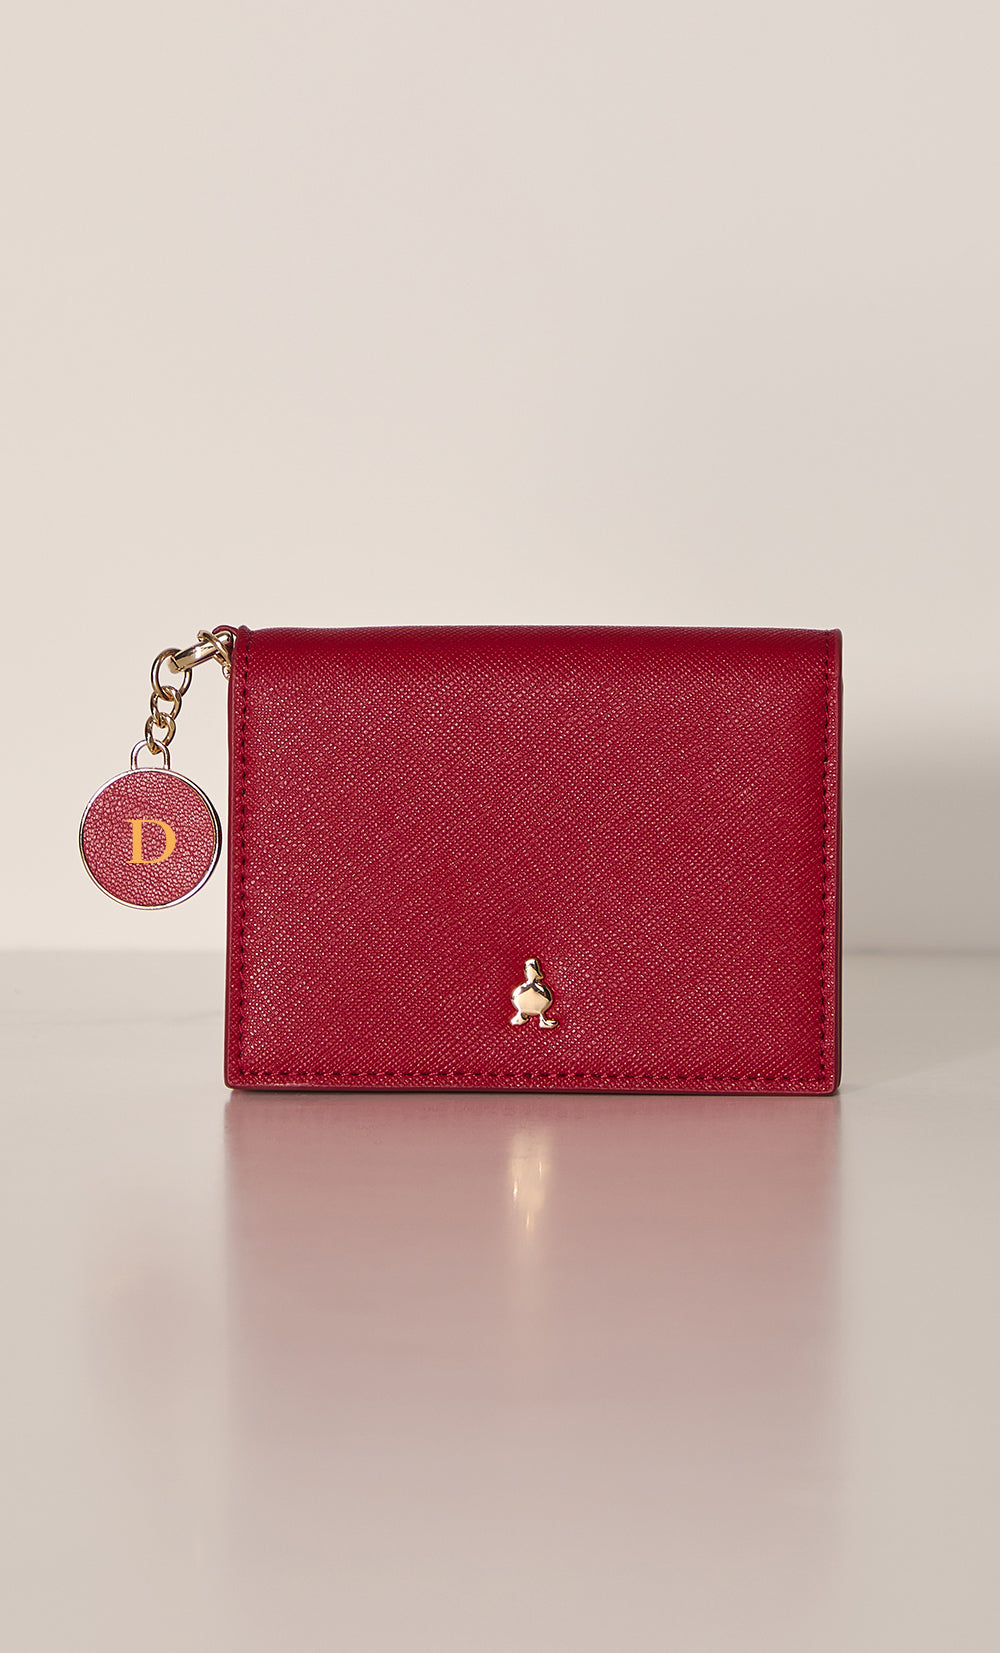 Clingy Card Holder with Chain in Cherry